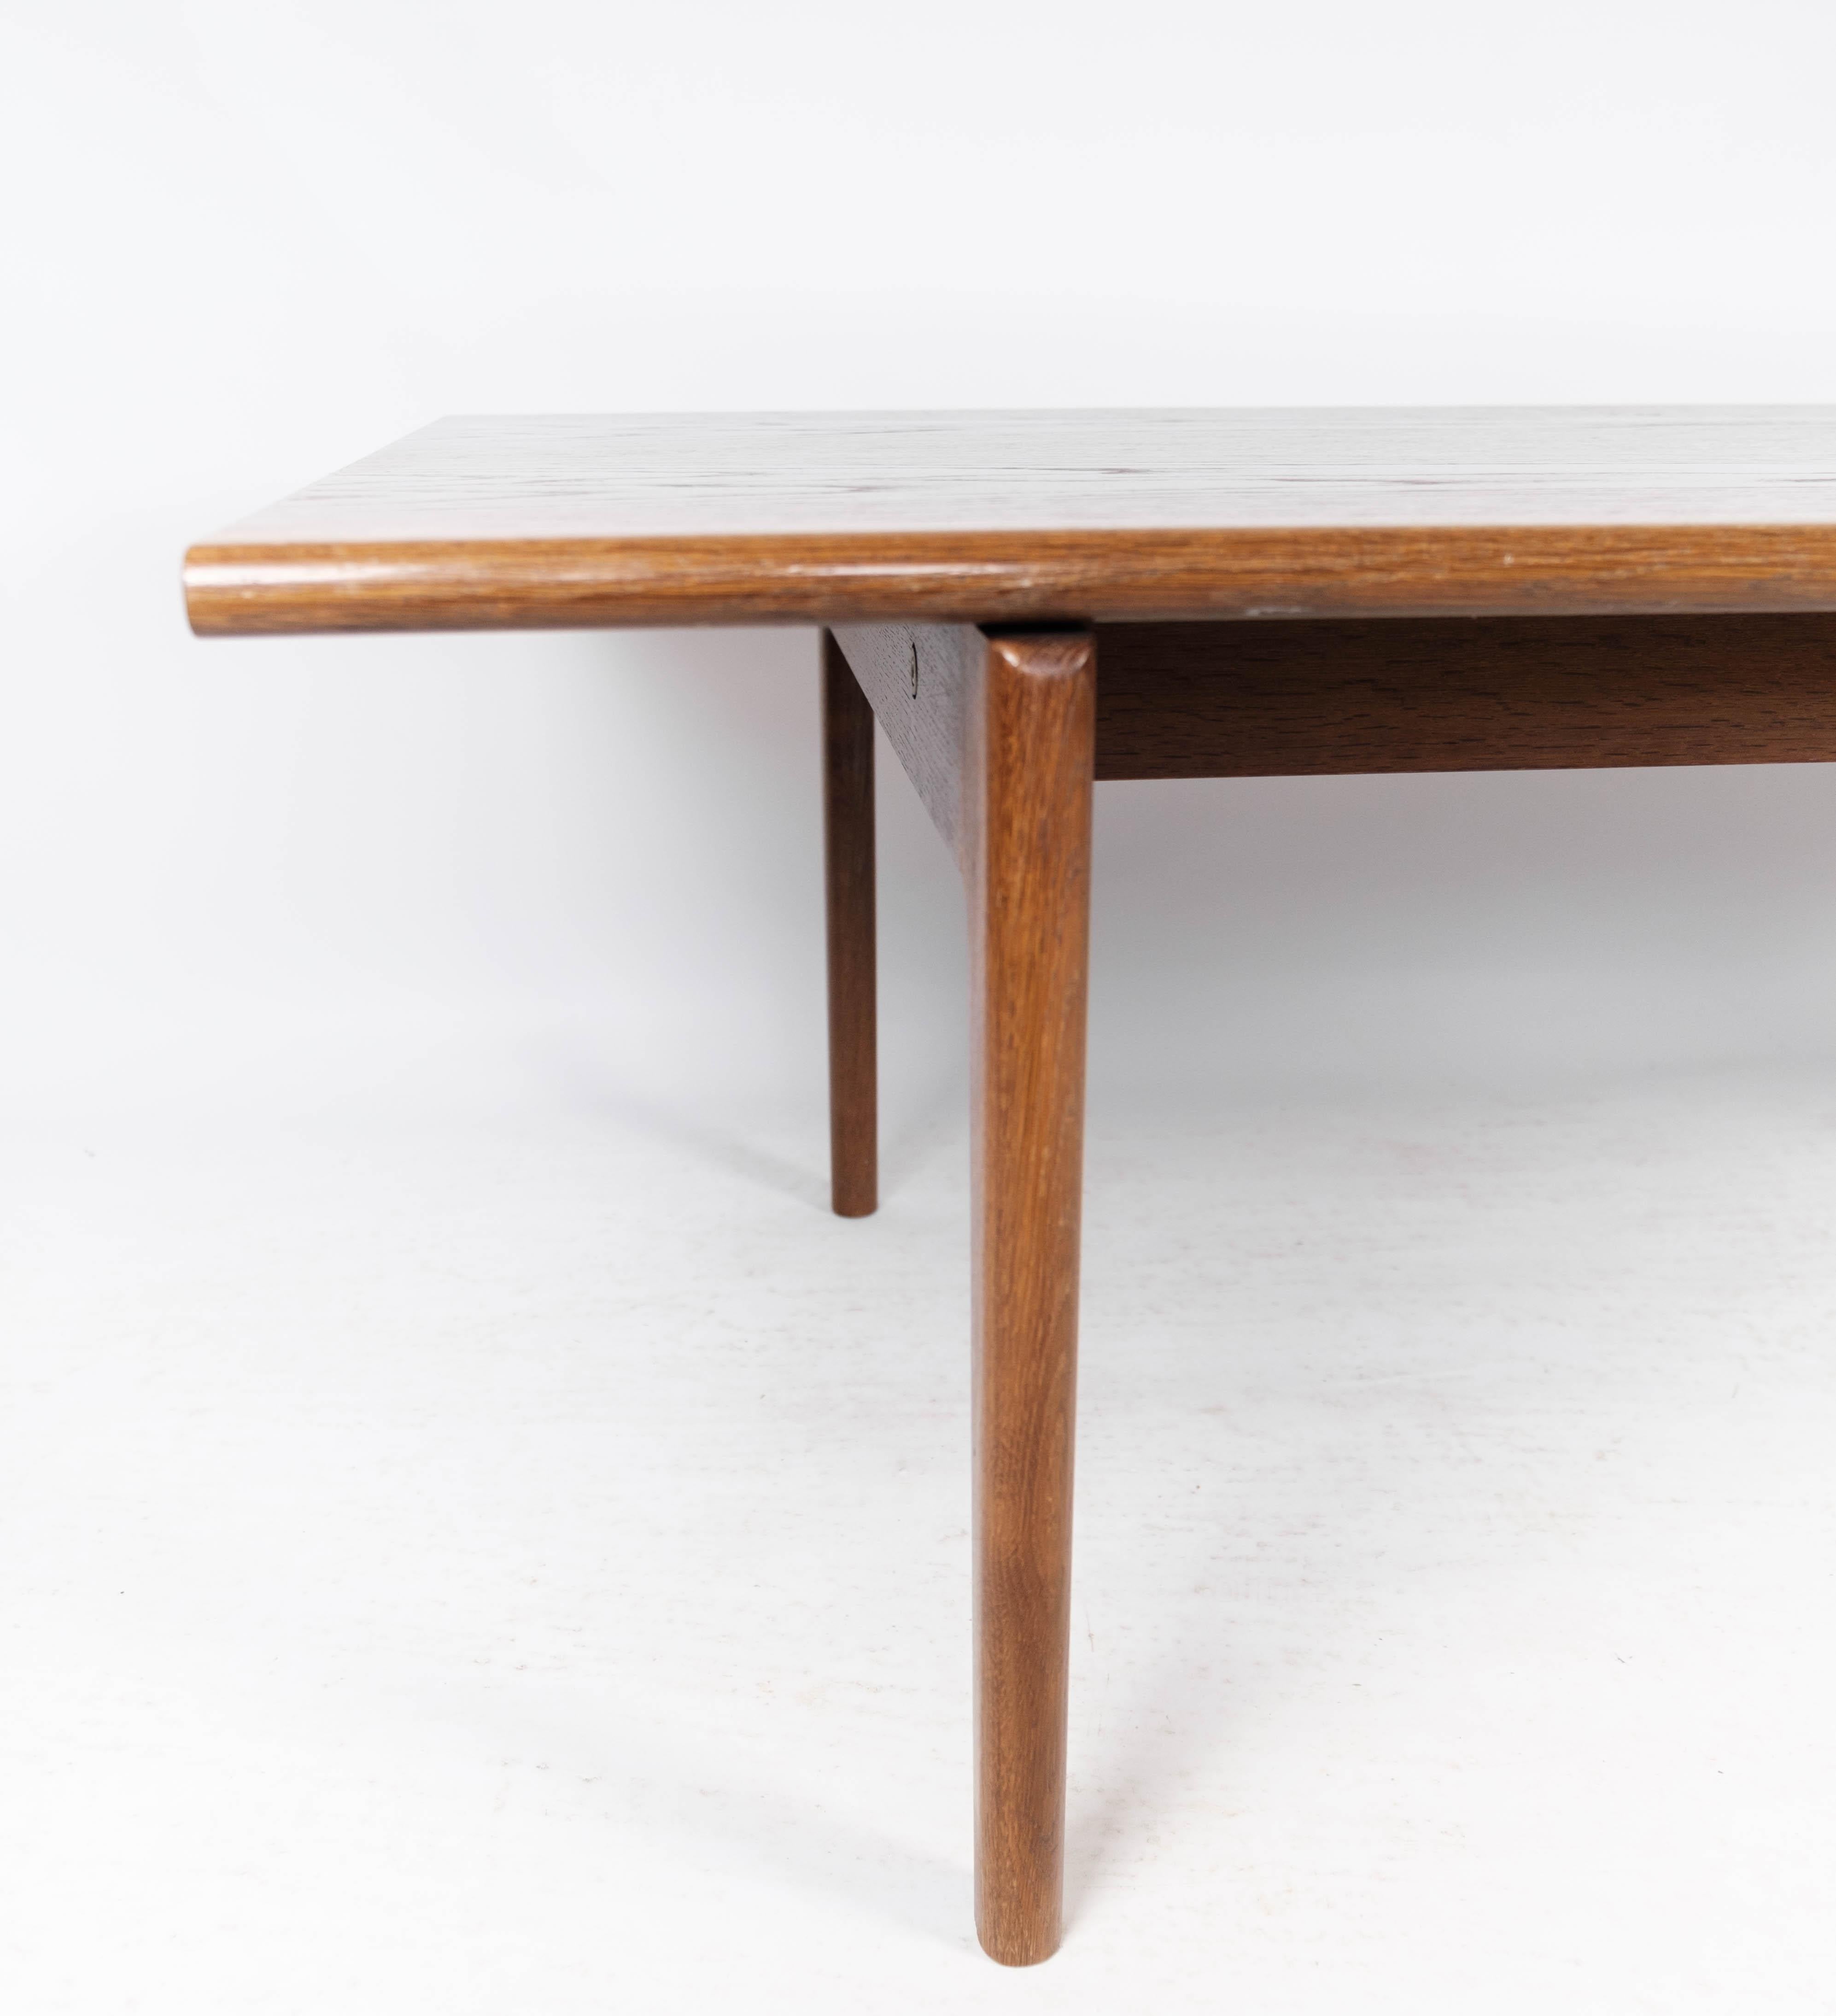 Danish Coffee Table in Teak Designed by Hans J. Wegner and Manufactured by GETAMA